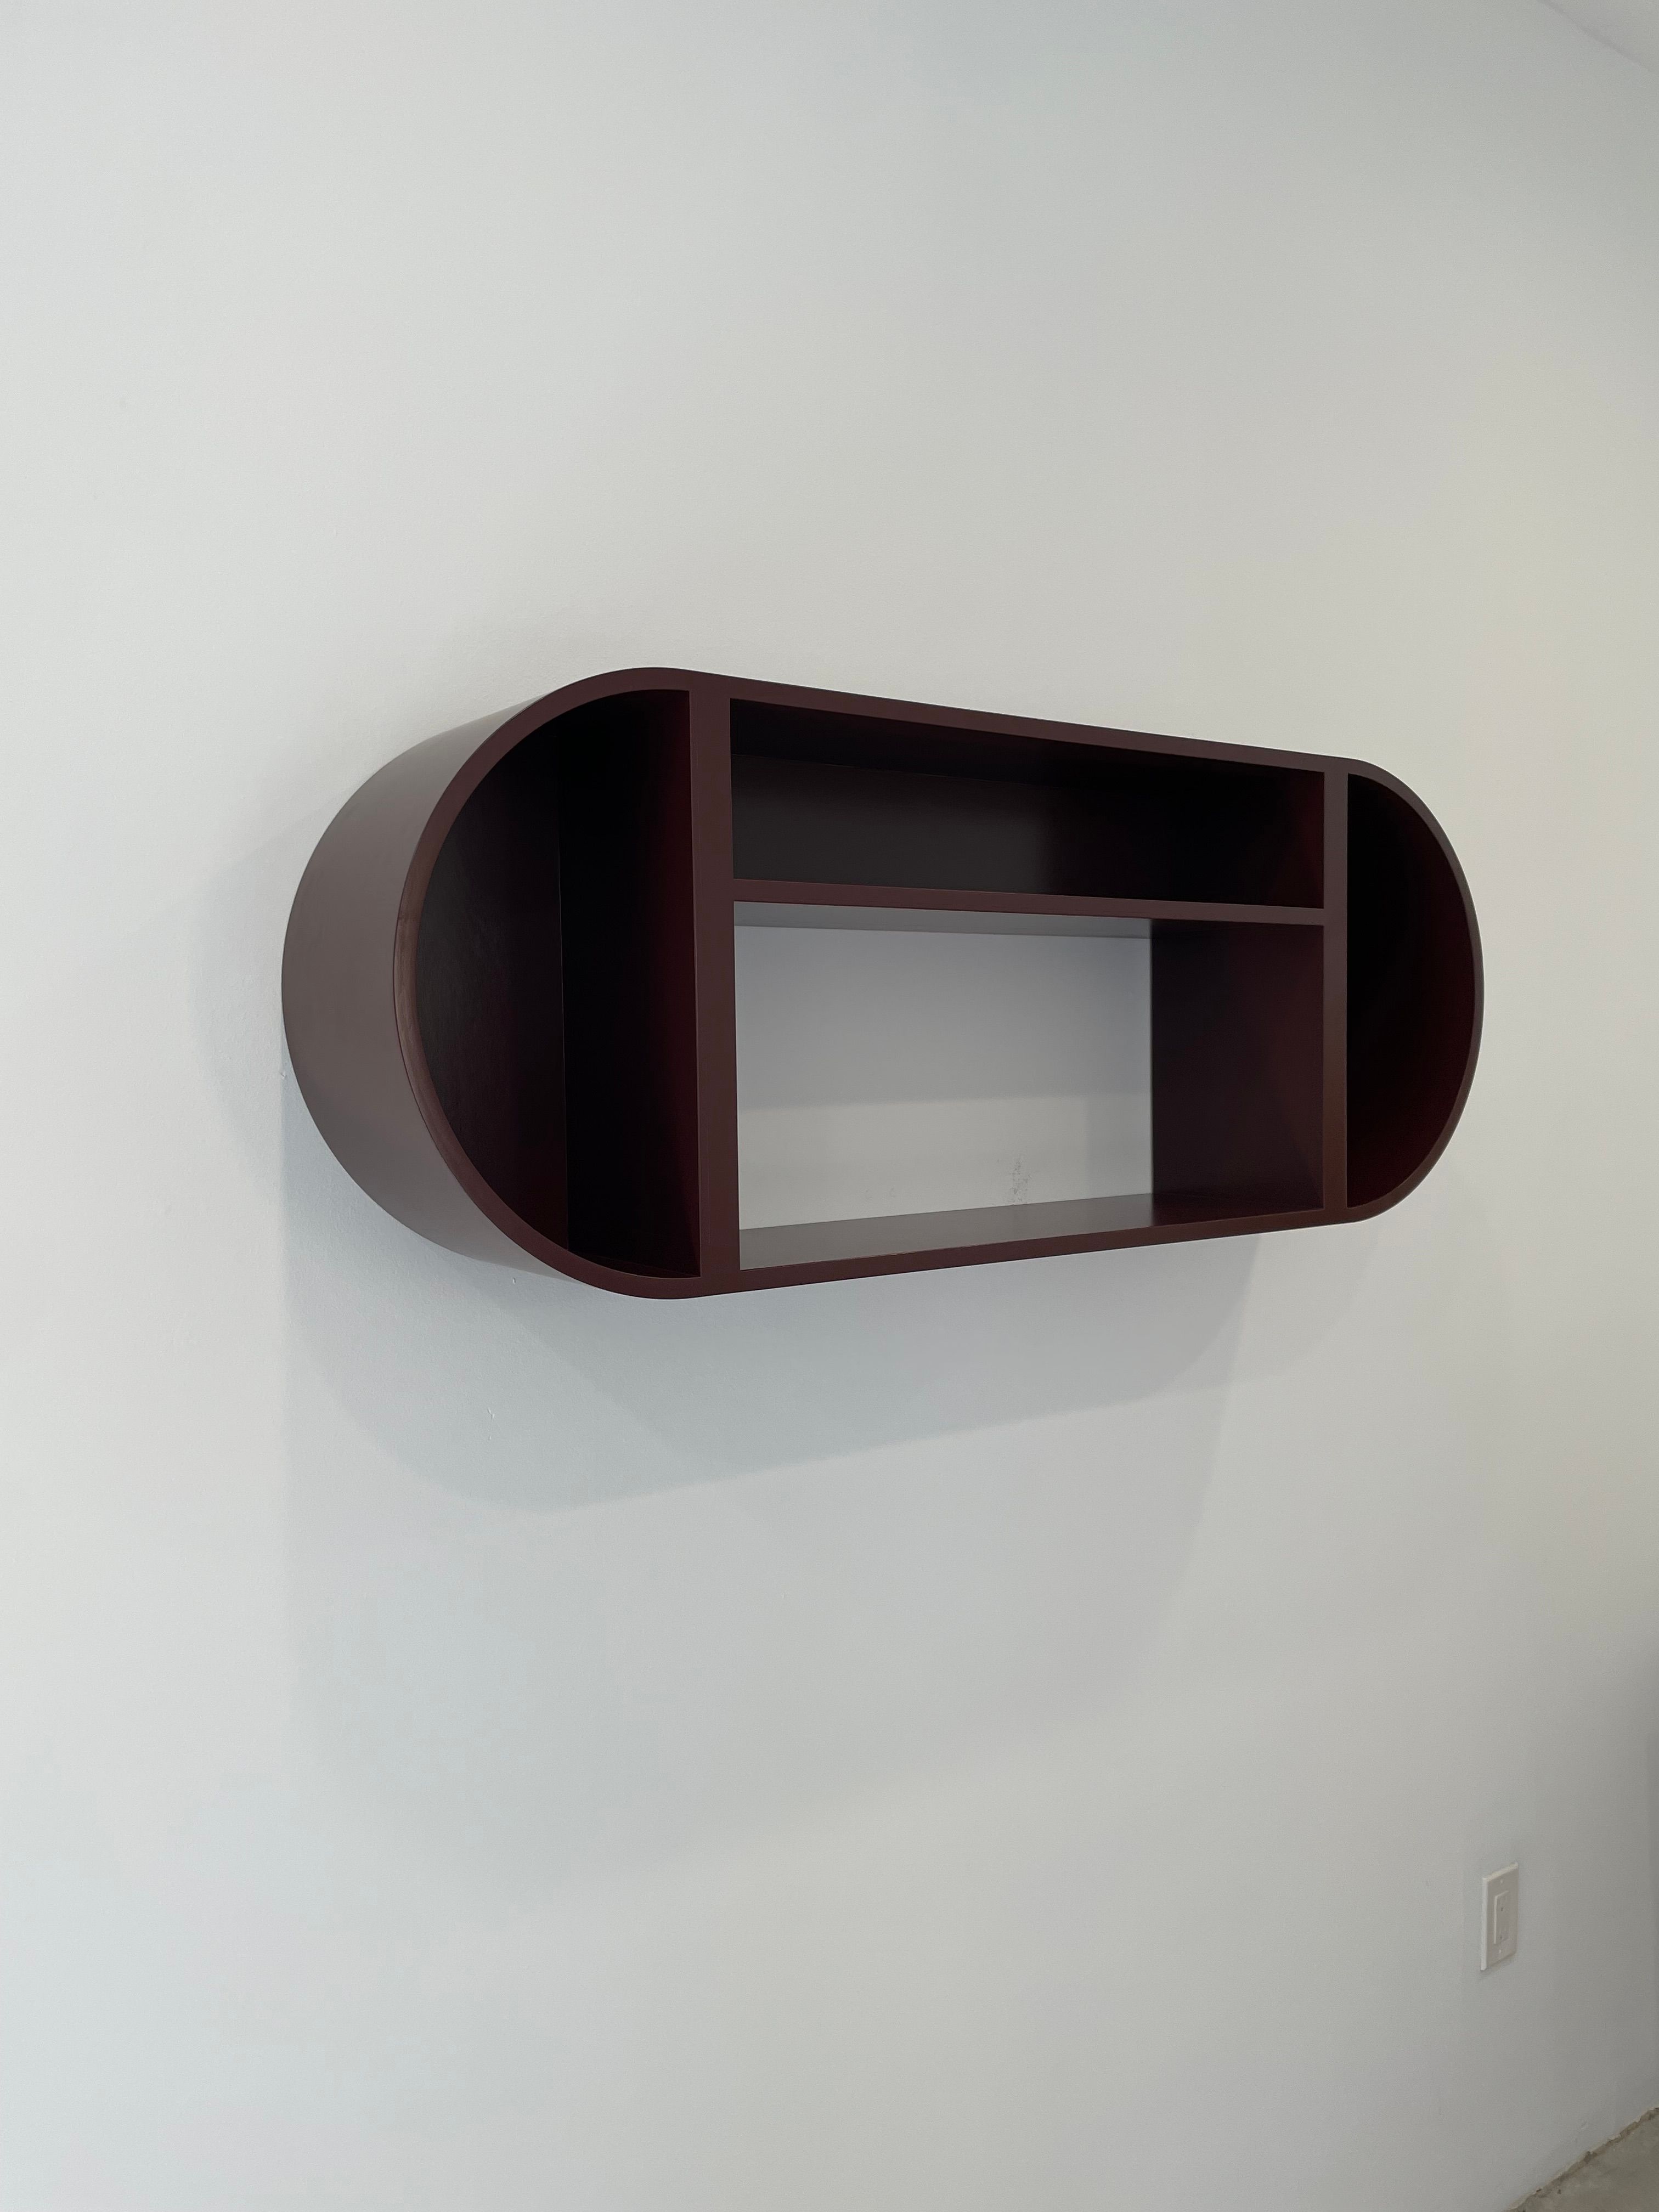  Wall Hanging Shelves - Braindead Fabrications product image 6